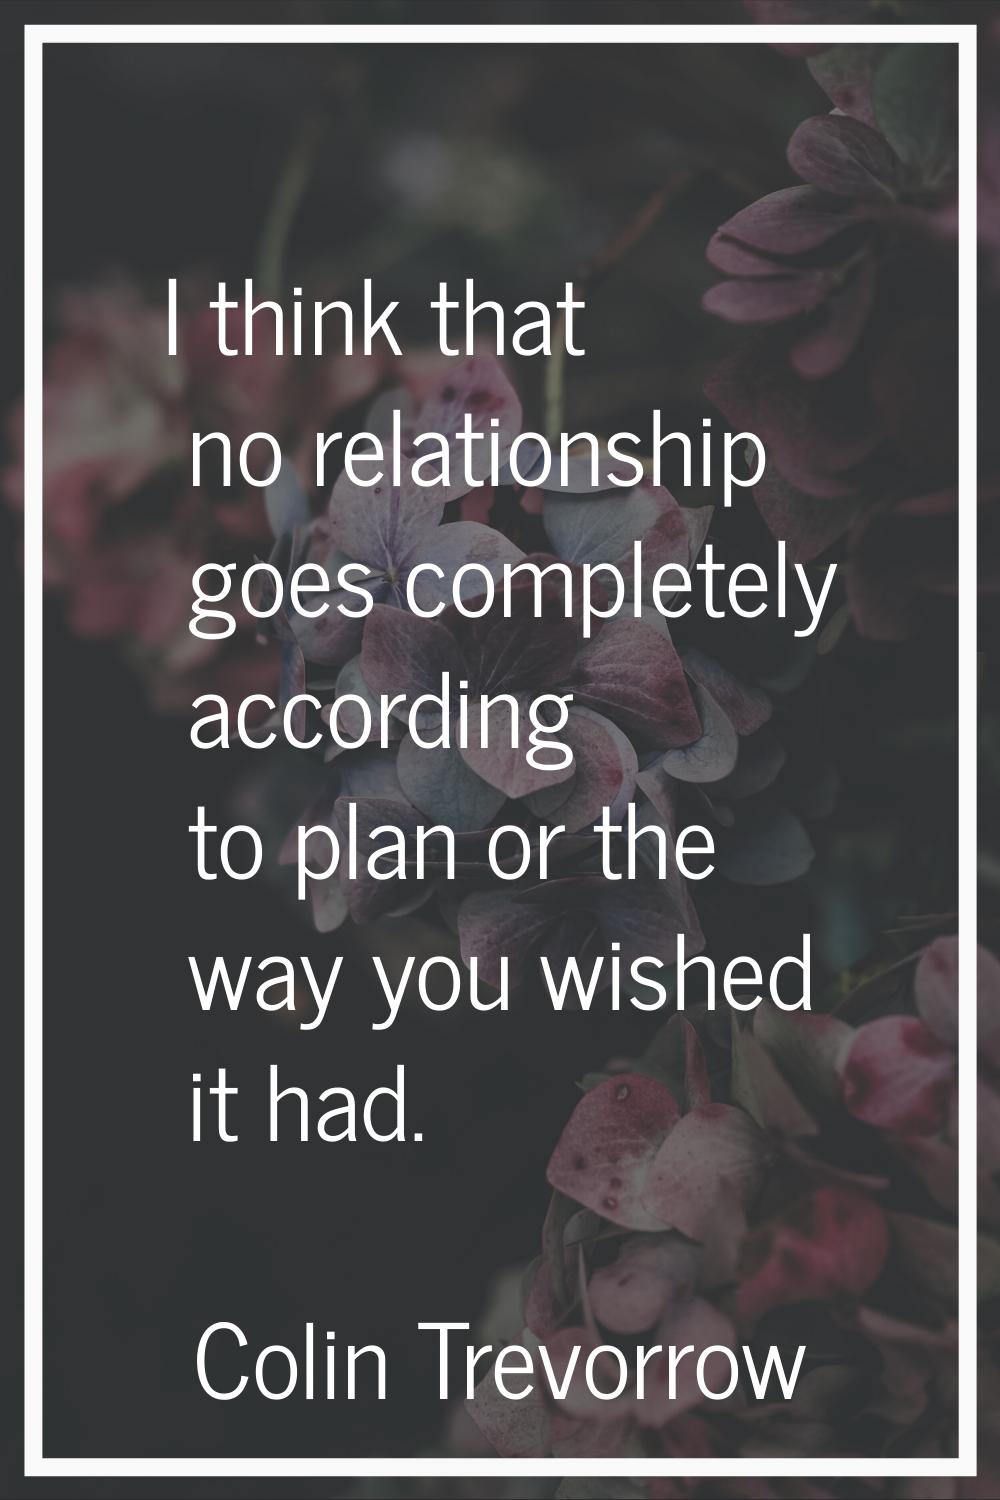 I think that no relationship goes completely according to plan or the way you wished it had.